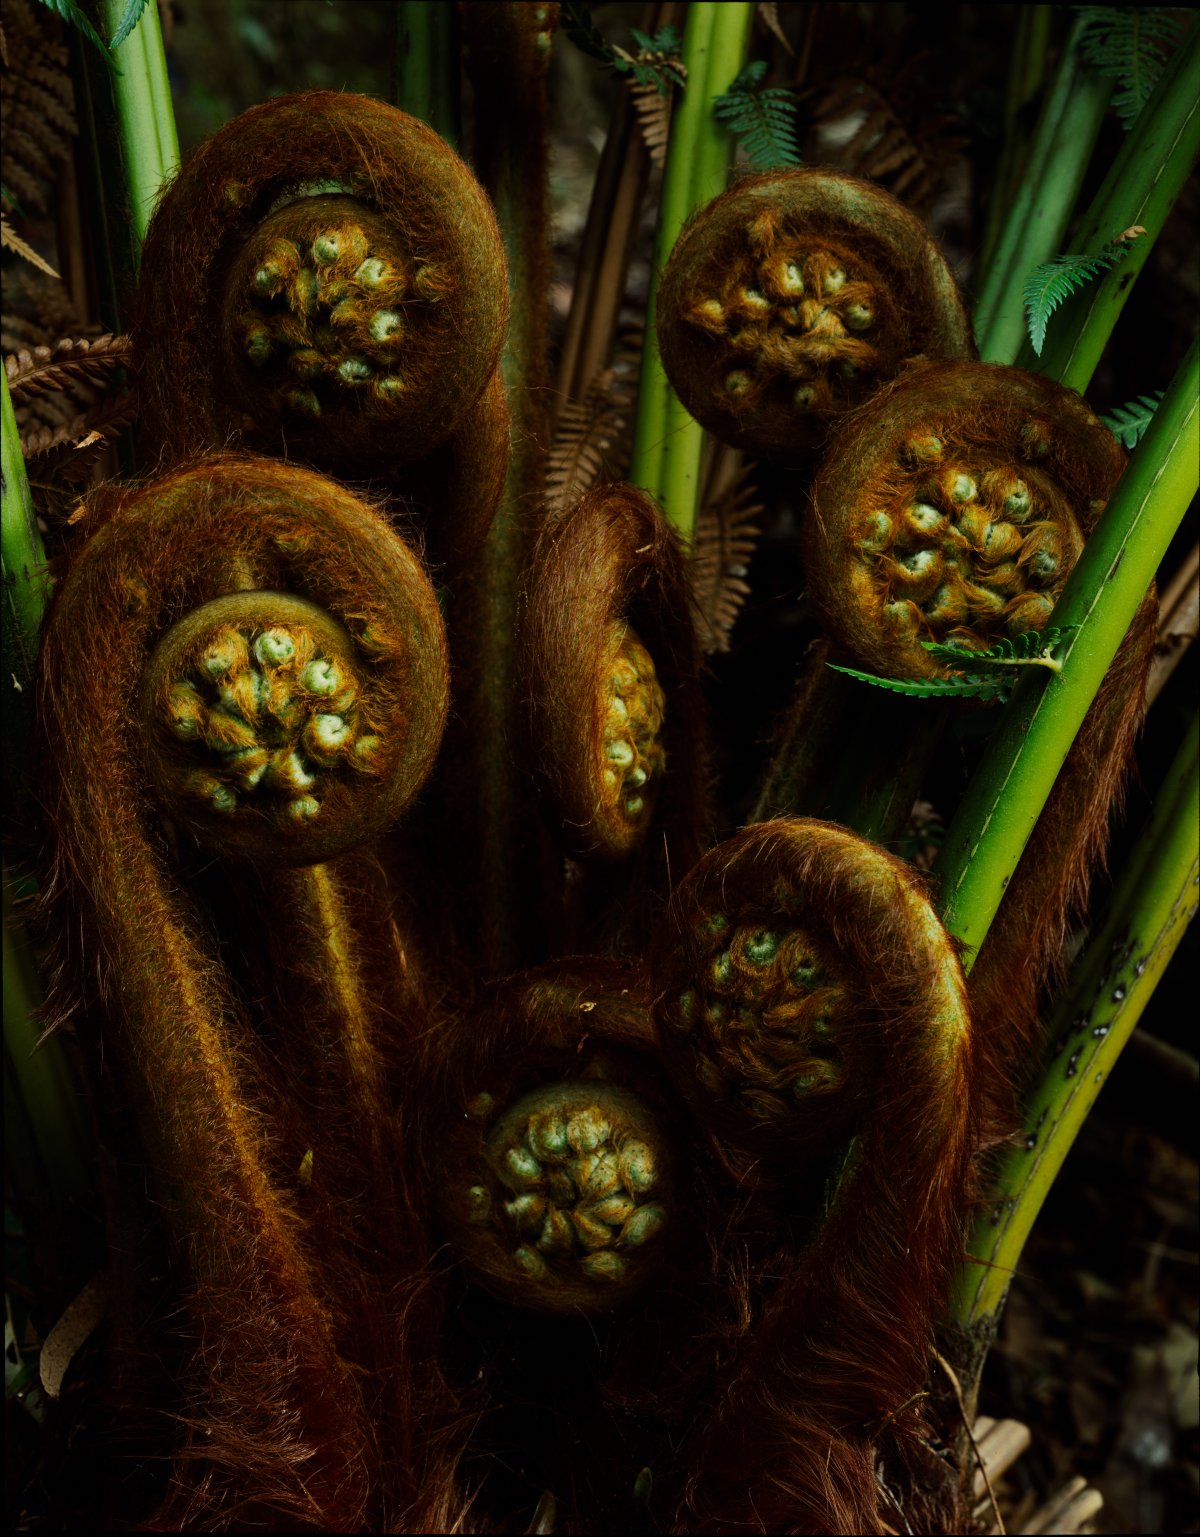 Brown furry uncoiling fronds of a fern. Green mature leaves can be seen among the fronds